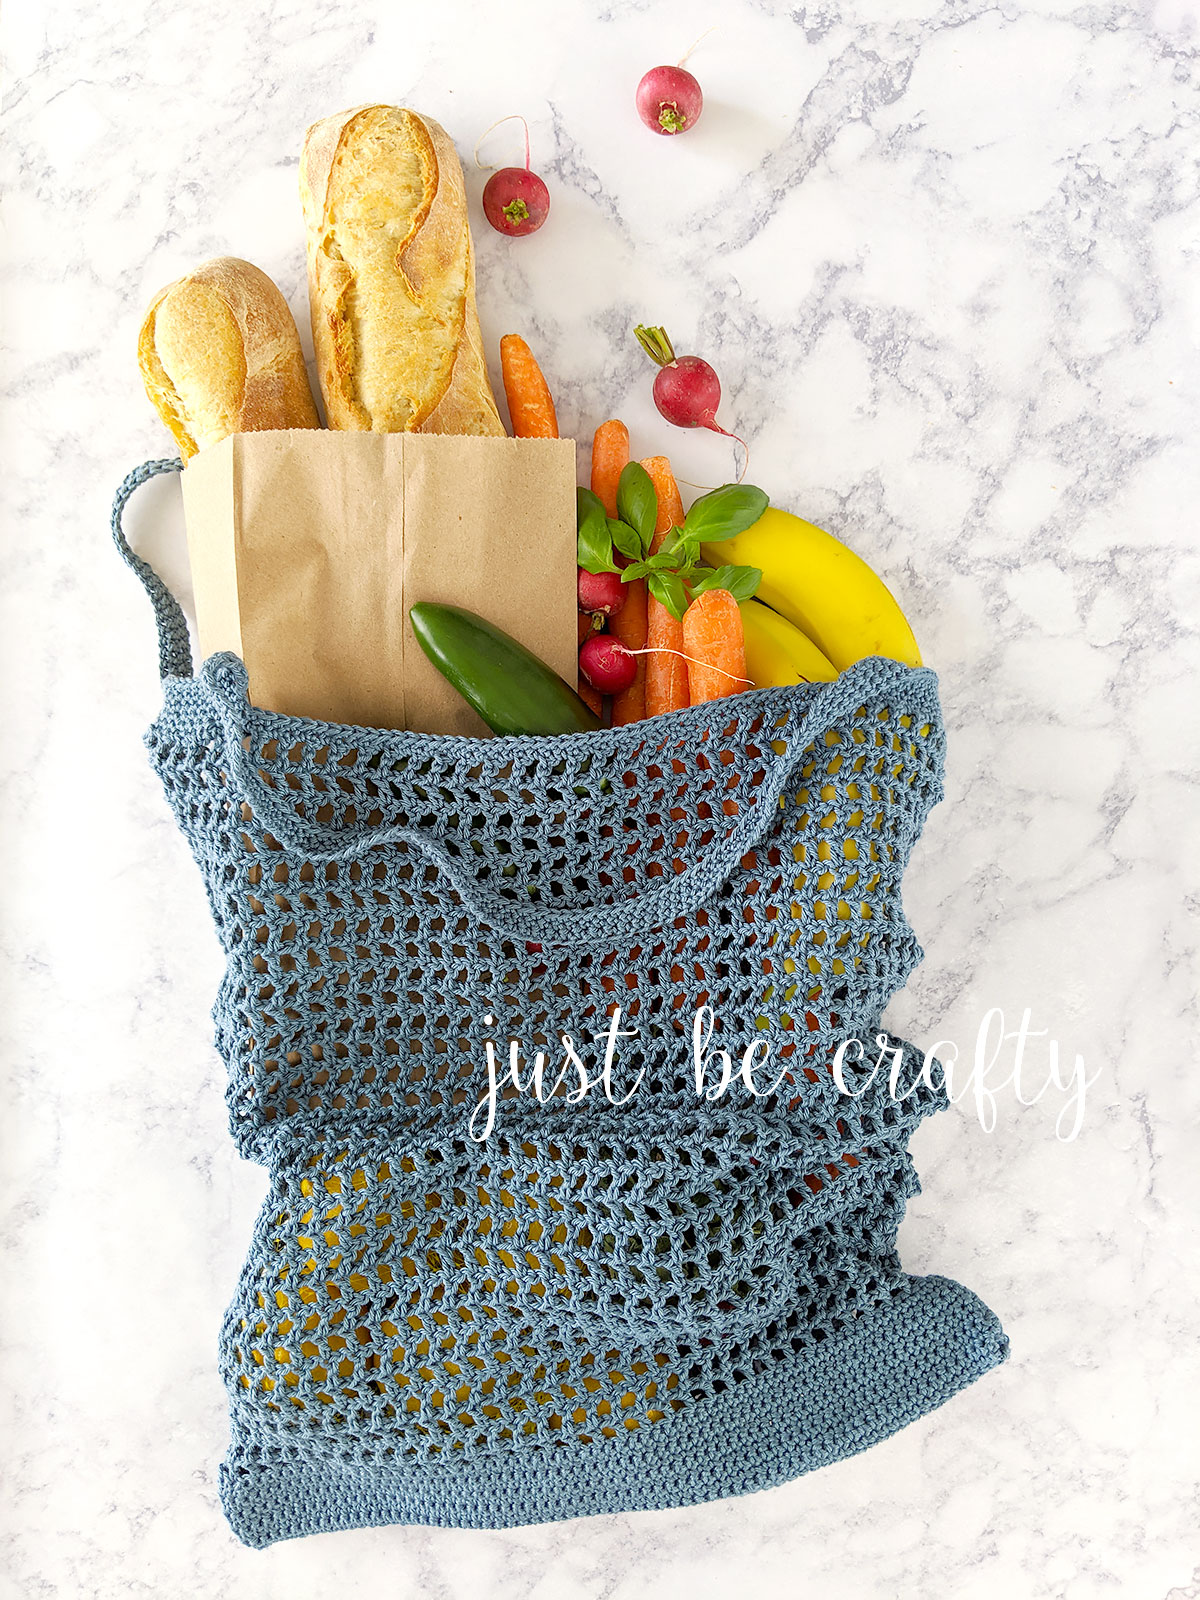 Veggie Stand Market Bag - Free crochet pattern by Just Be Crafty